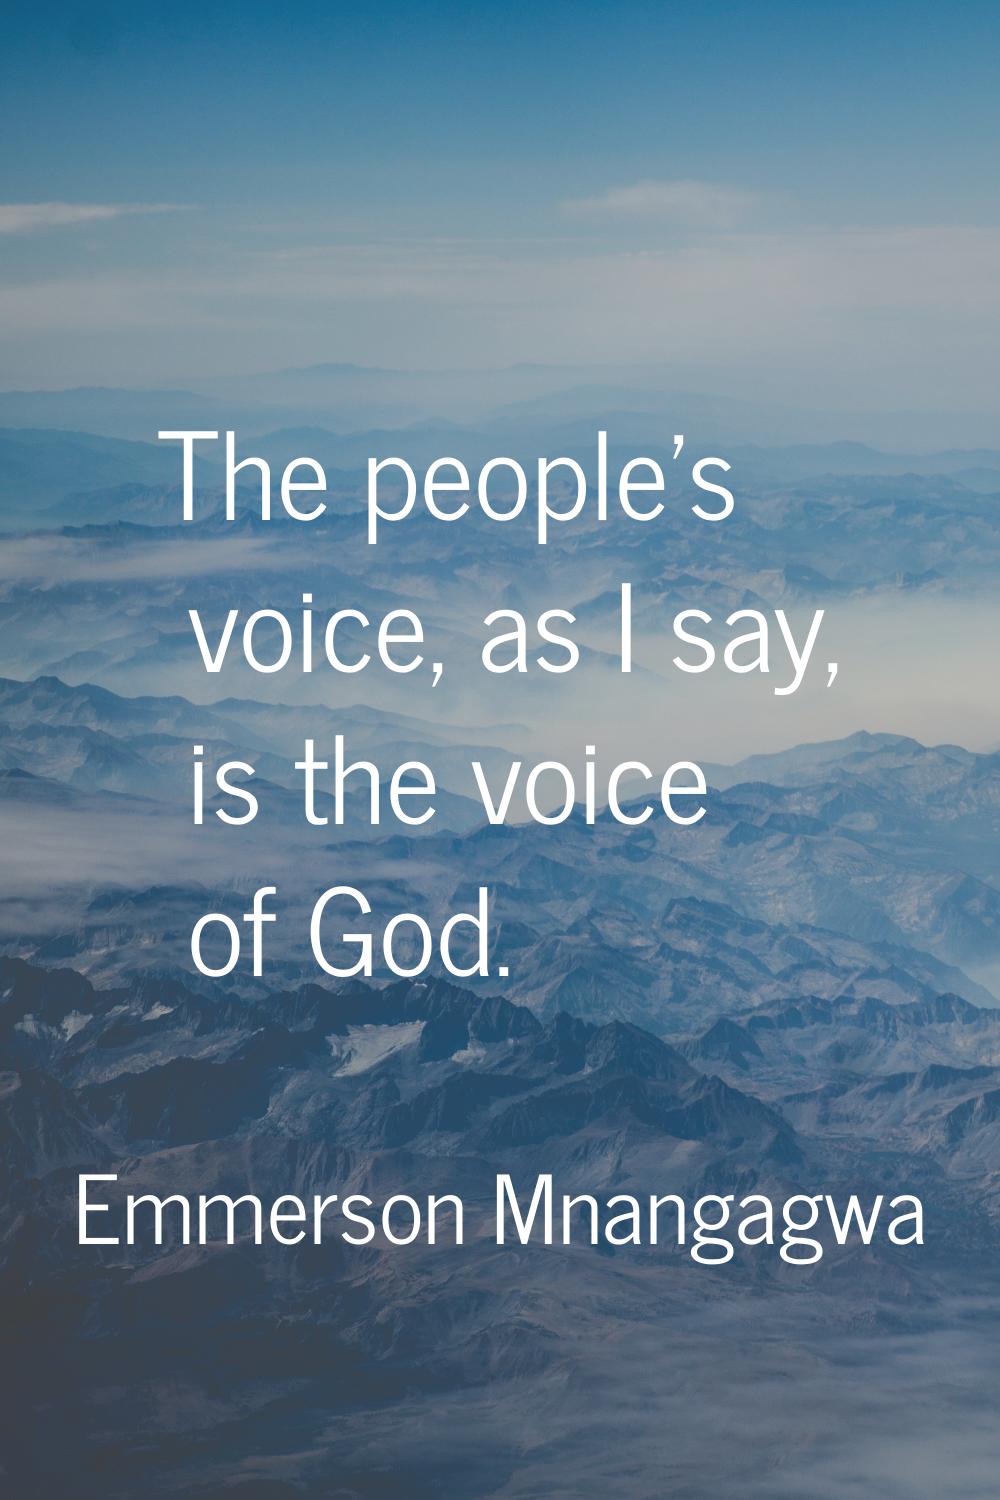 The people's voice, as I say, is the voice of God.